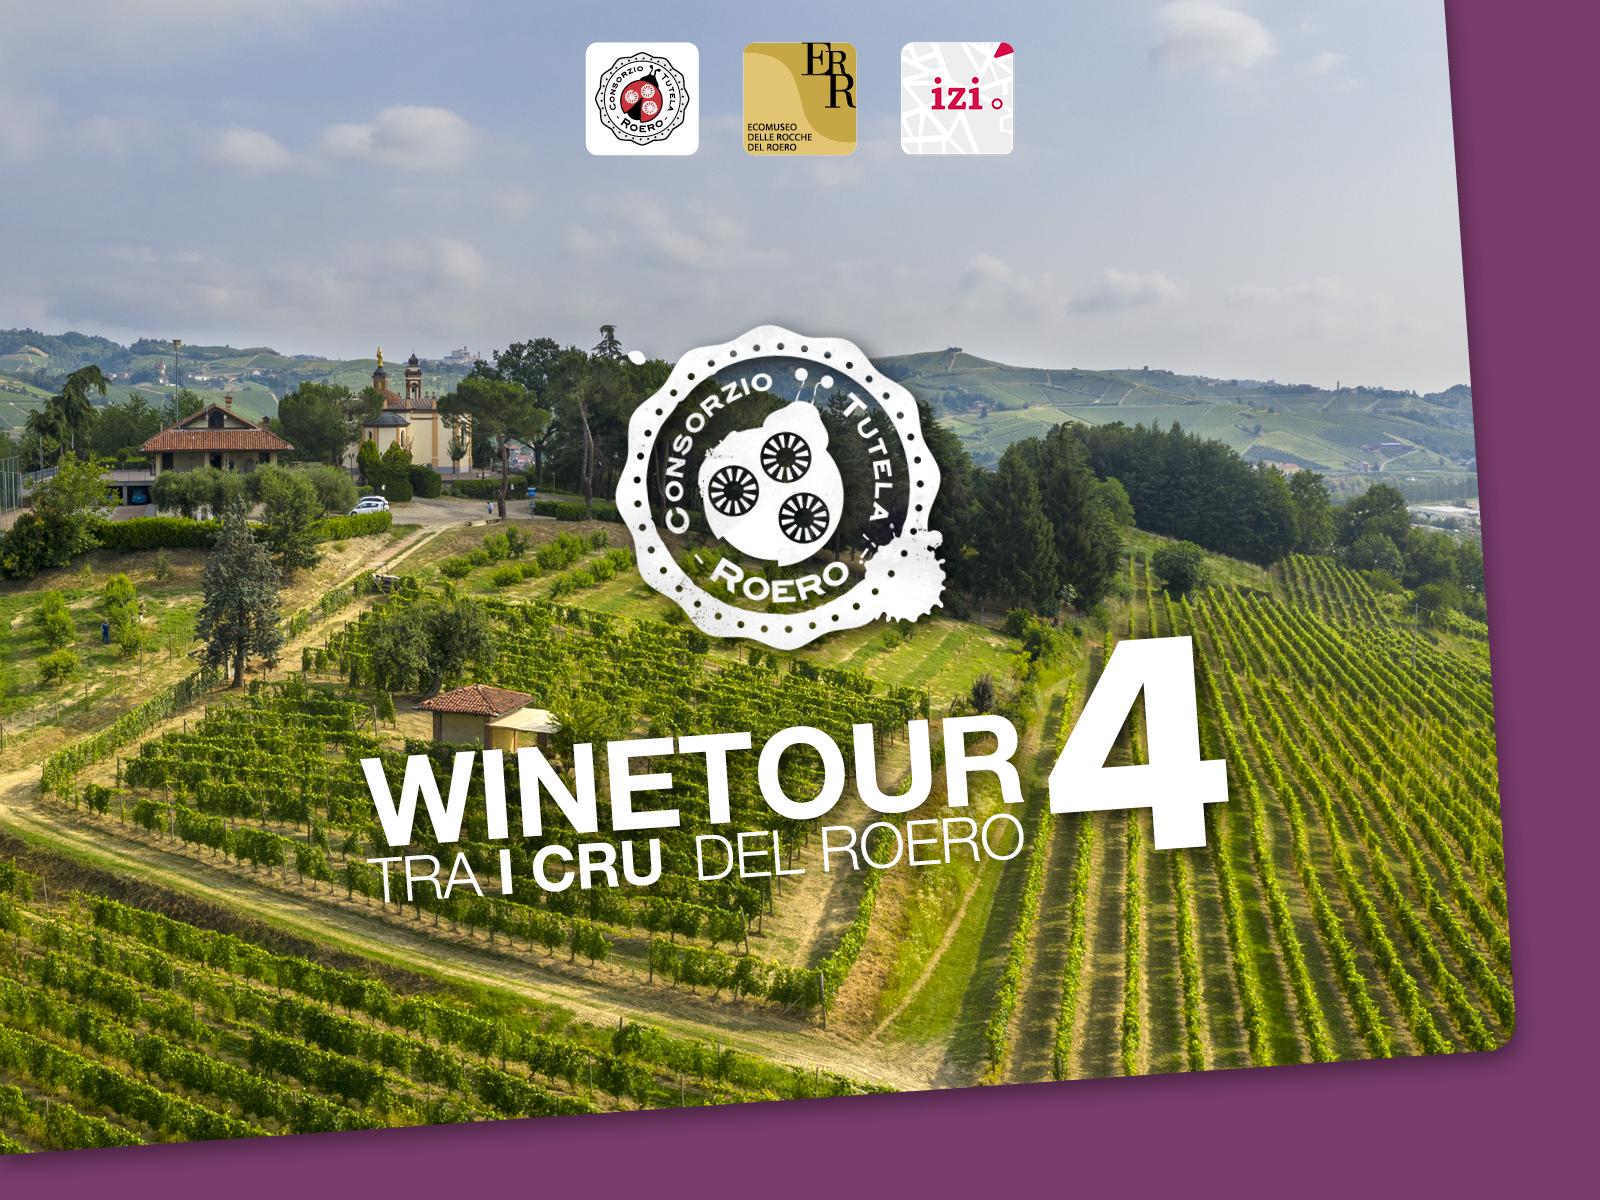 WineTour 4 – The panoramic crus of central Roero territory